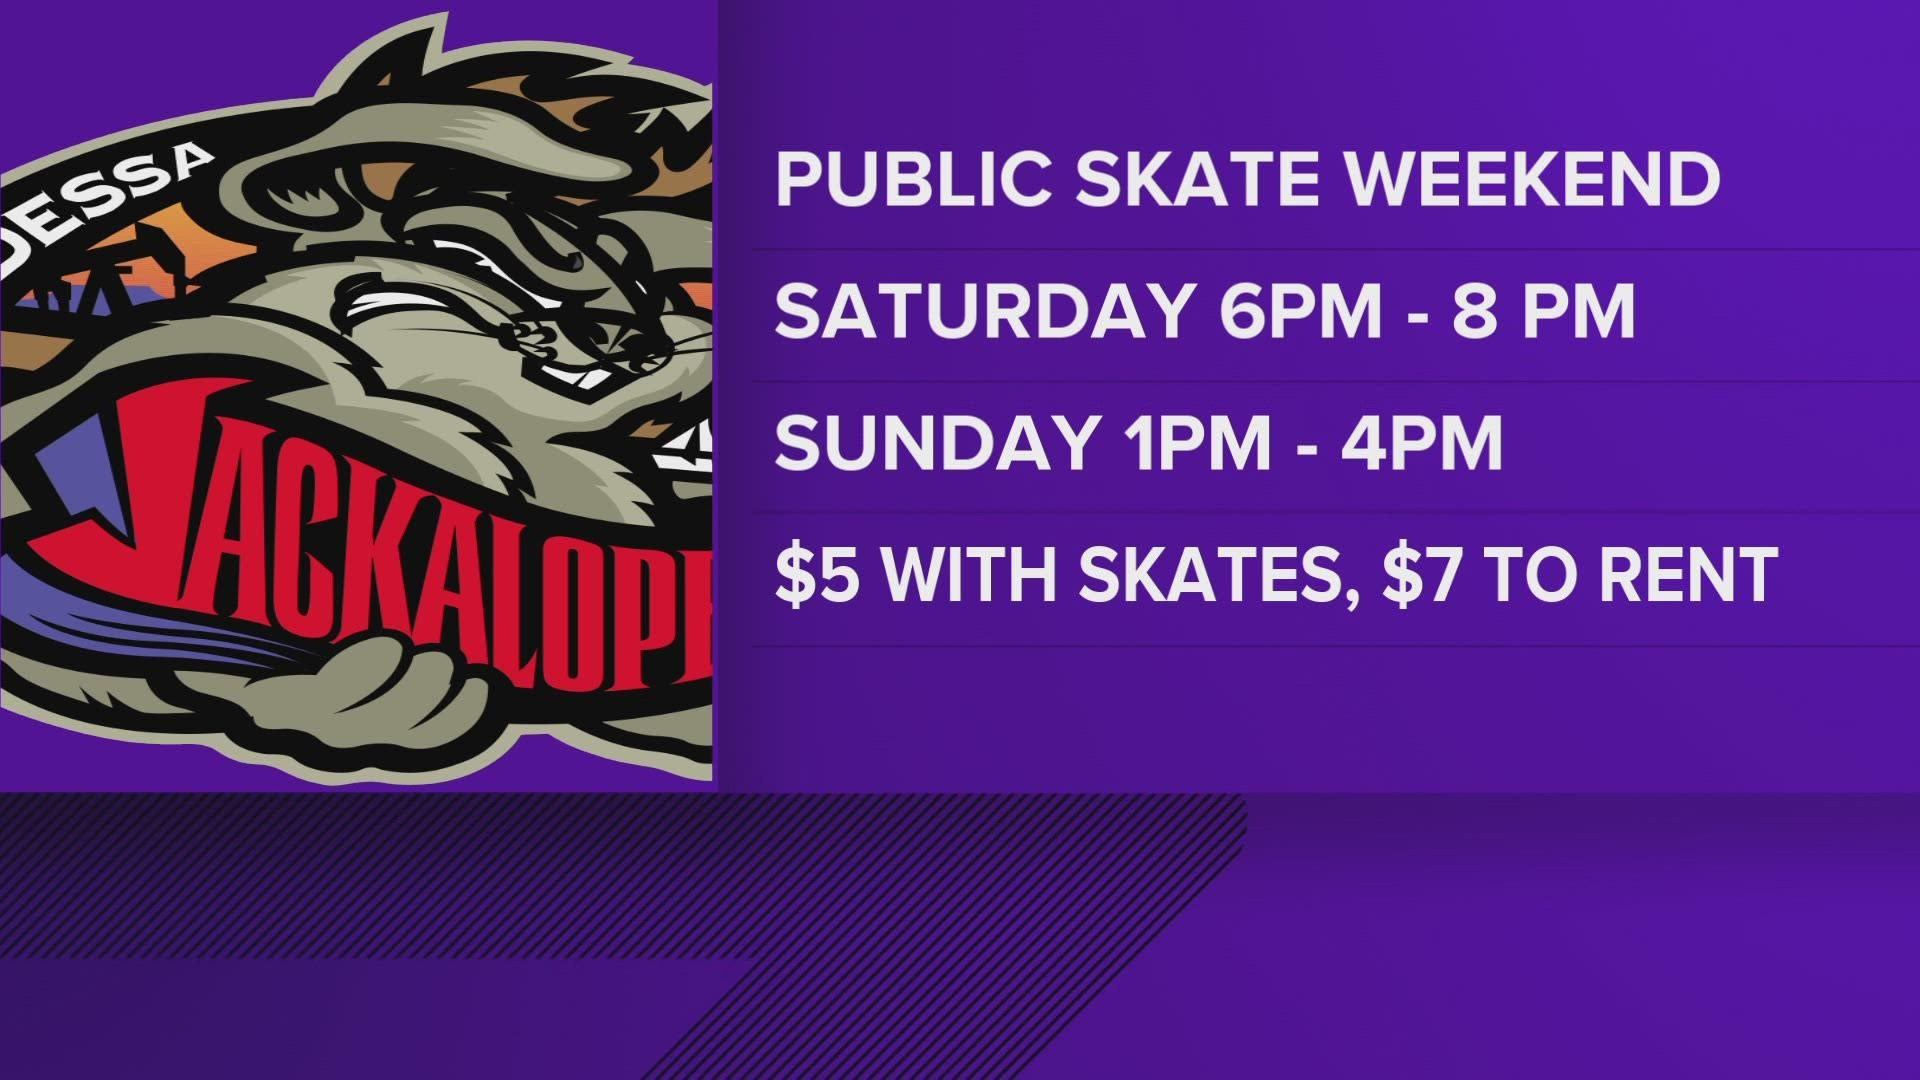 The Odessa Jackalopes will host two public skate events at the coliseum.